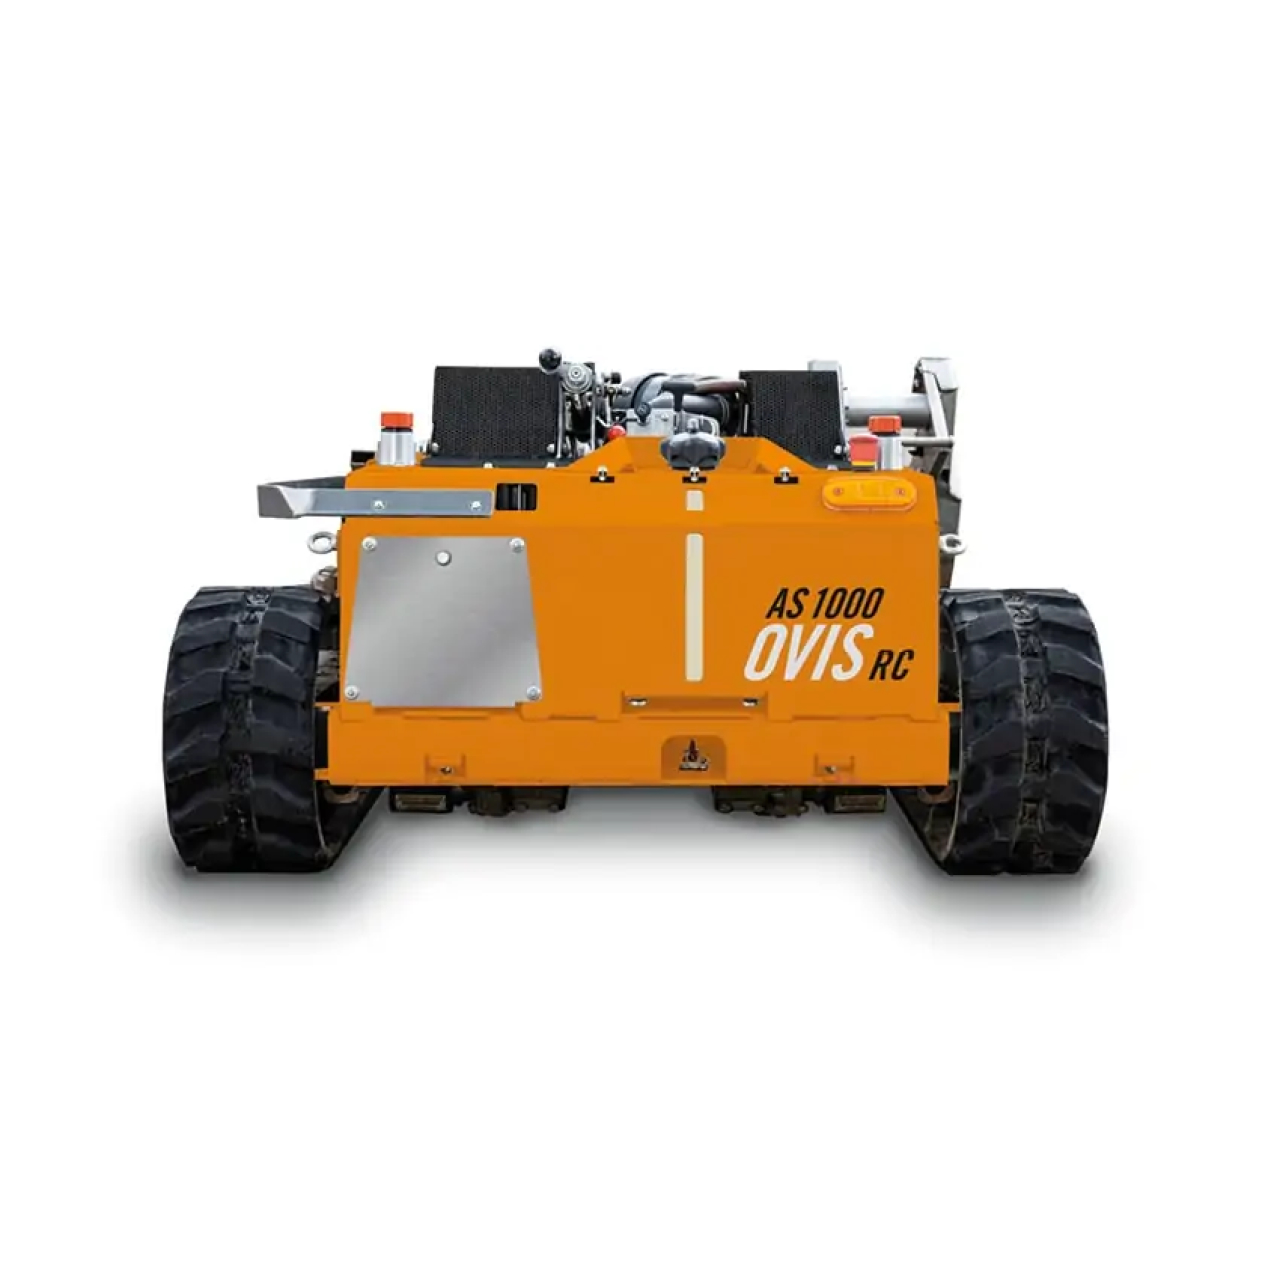 AS 1000 OVIS RC